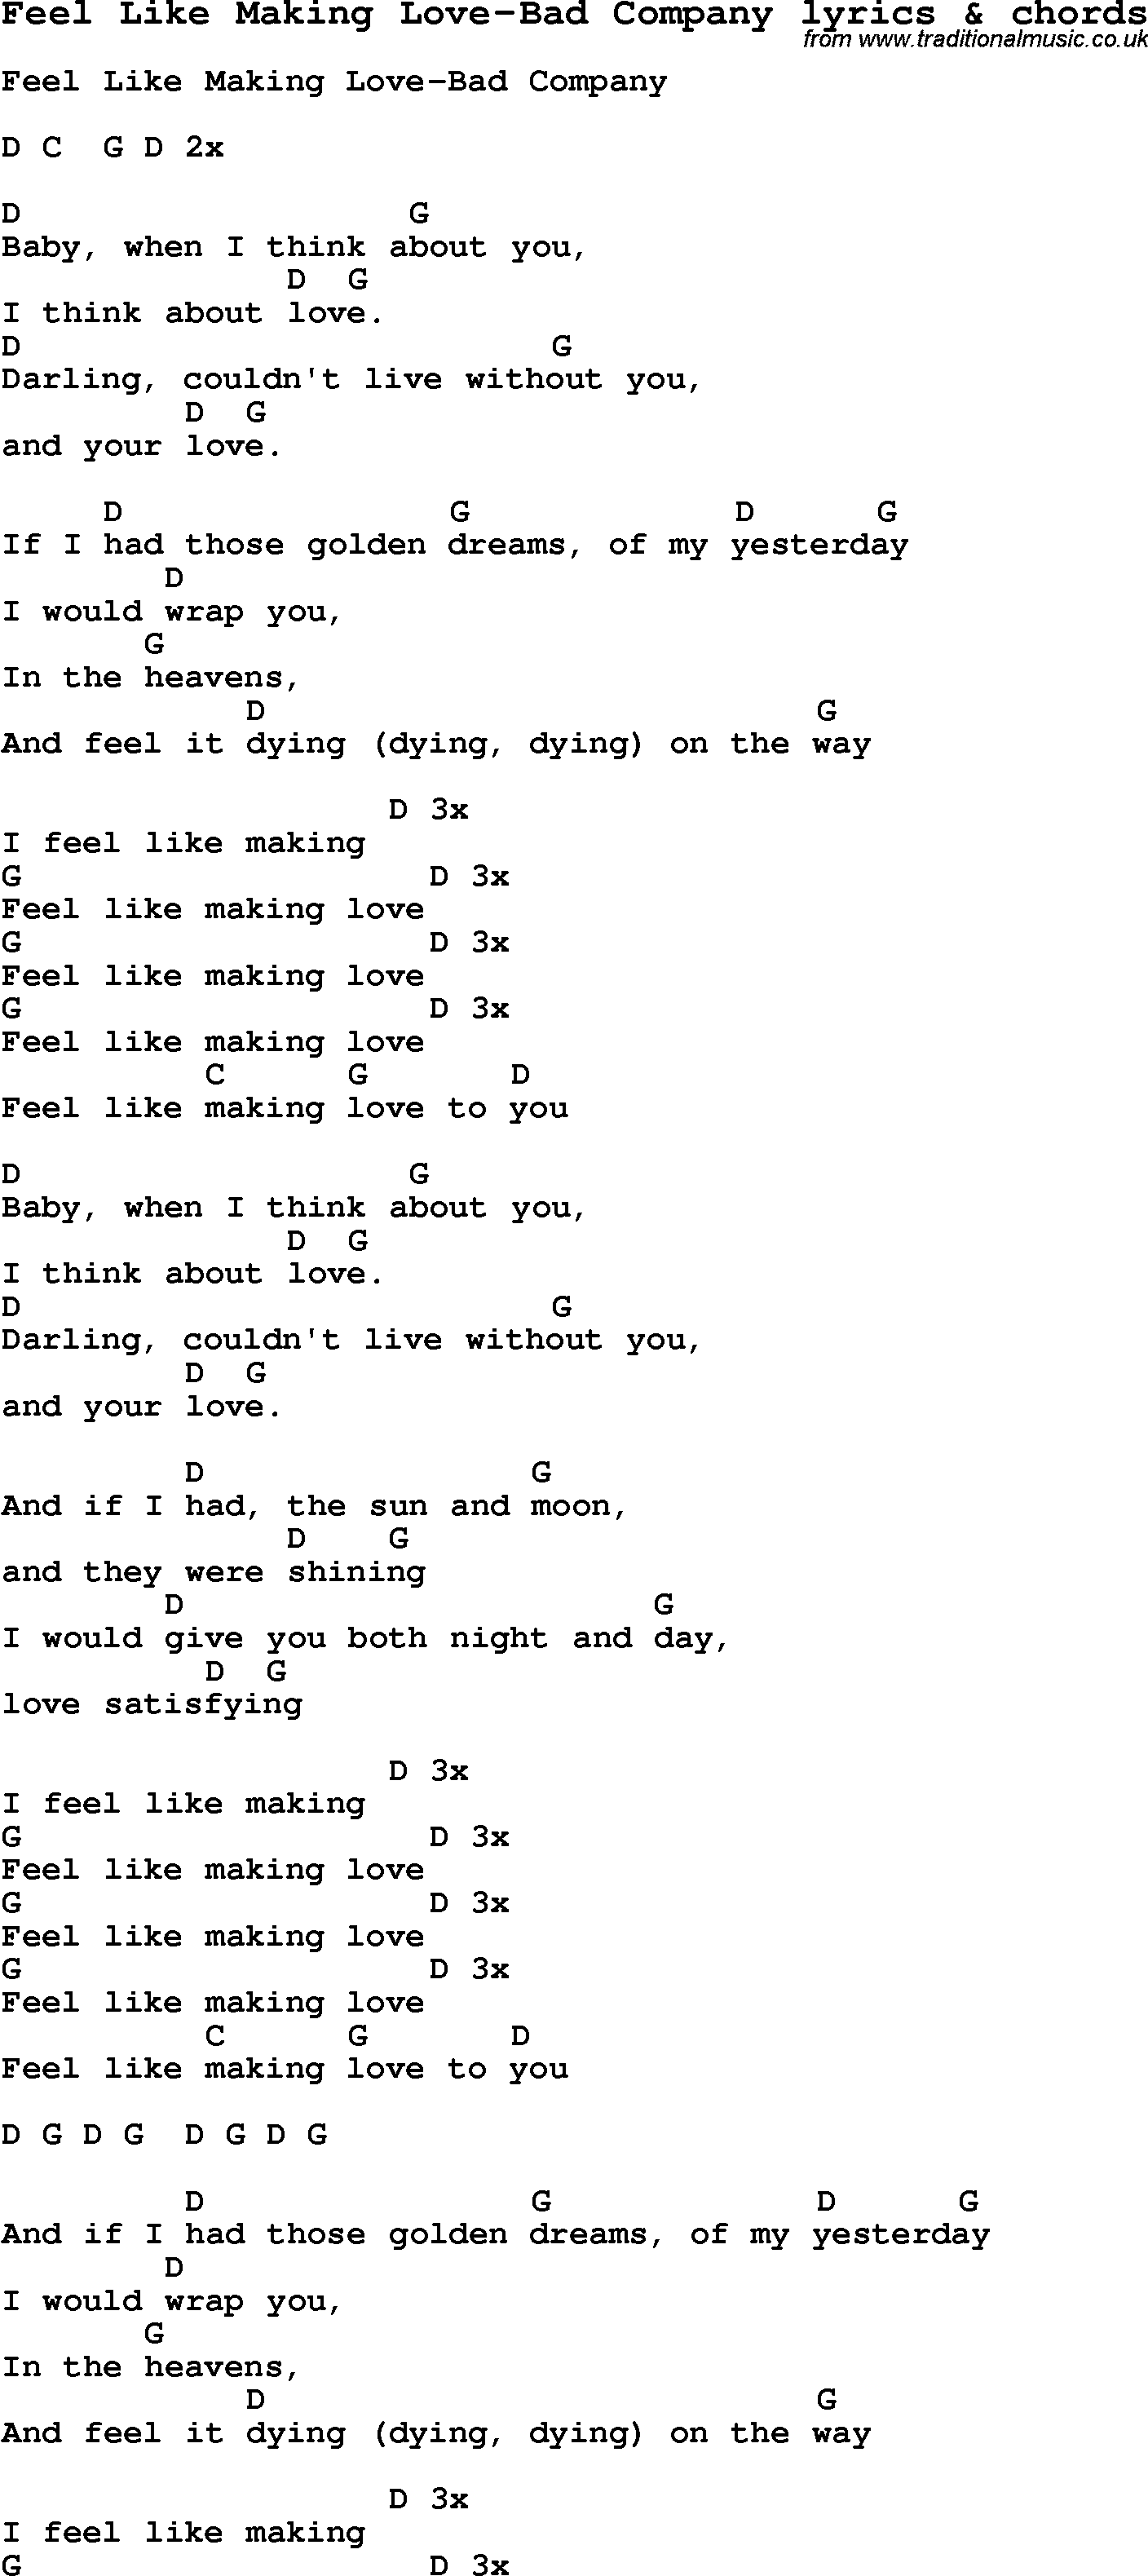 Love Song Lyrics for:Feel Like Making Love-Bad Company with chords.